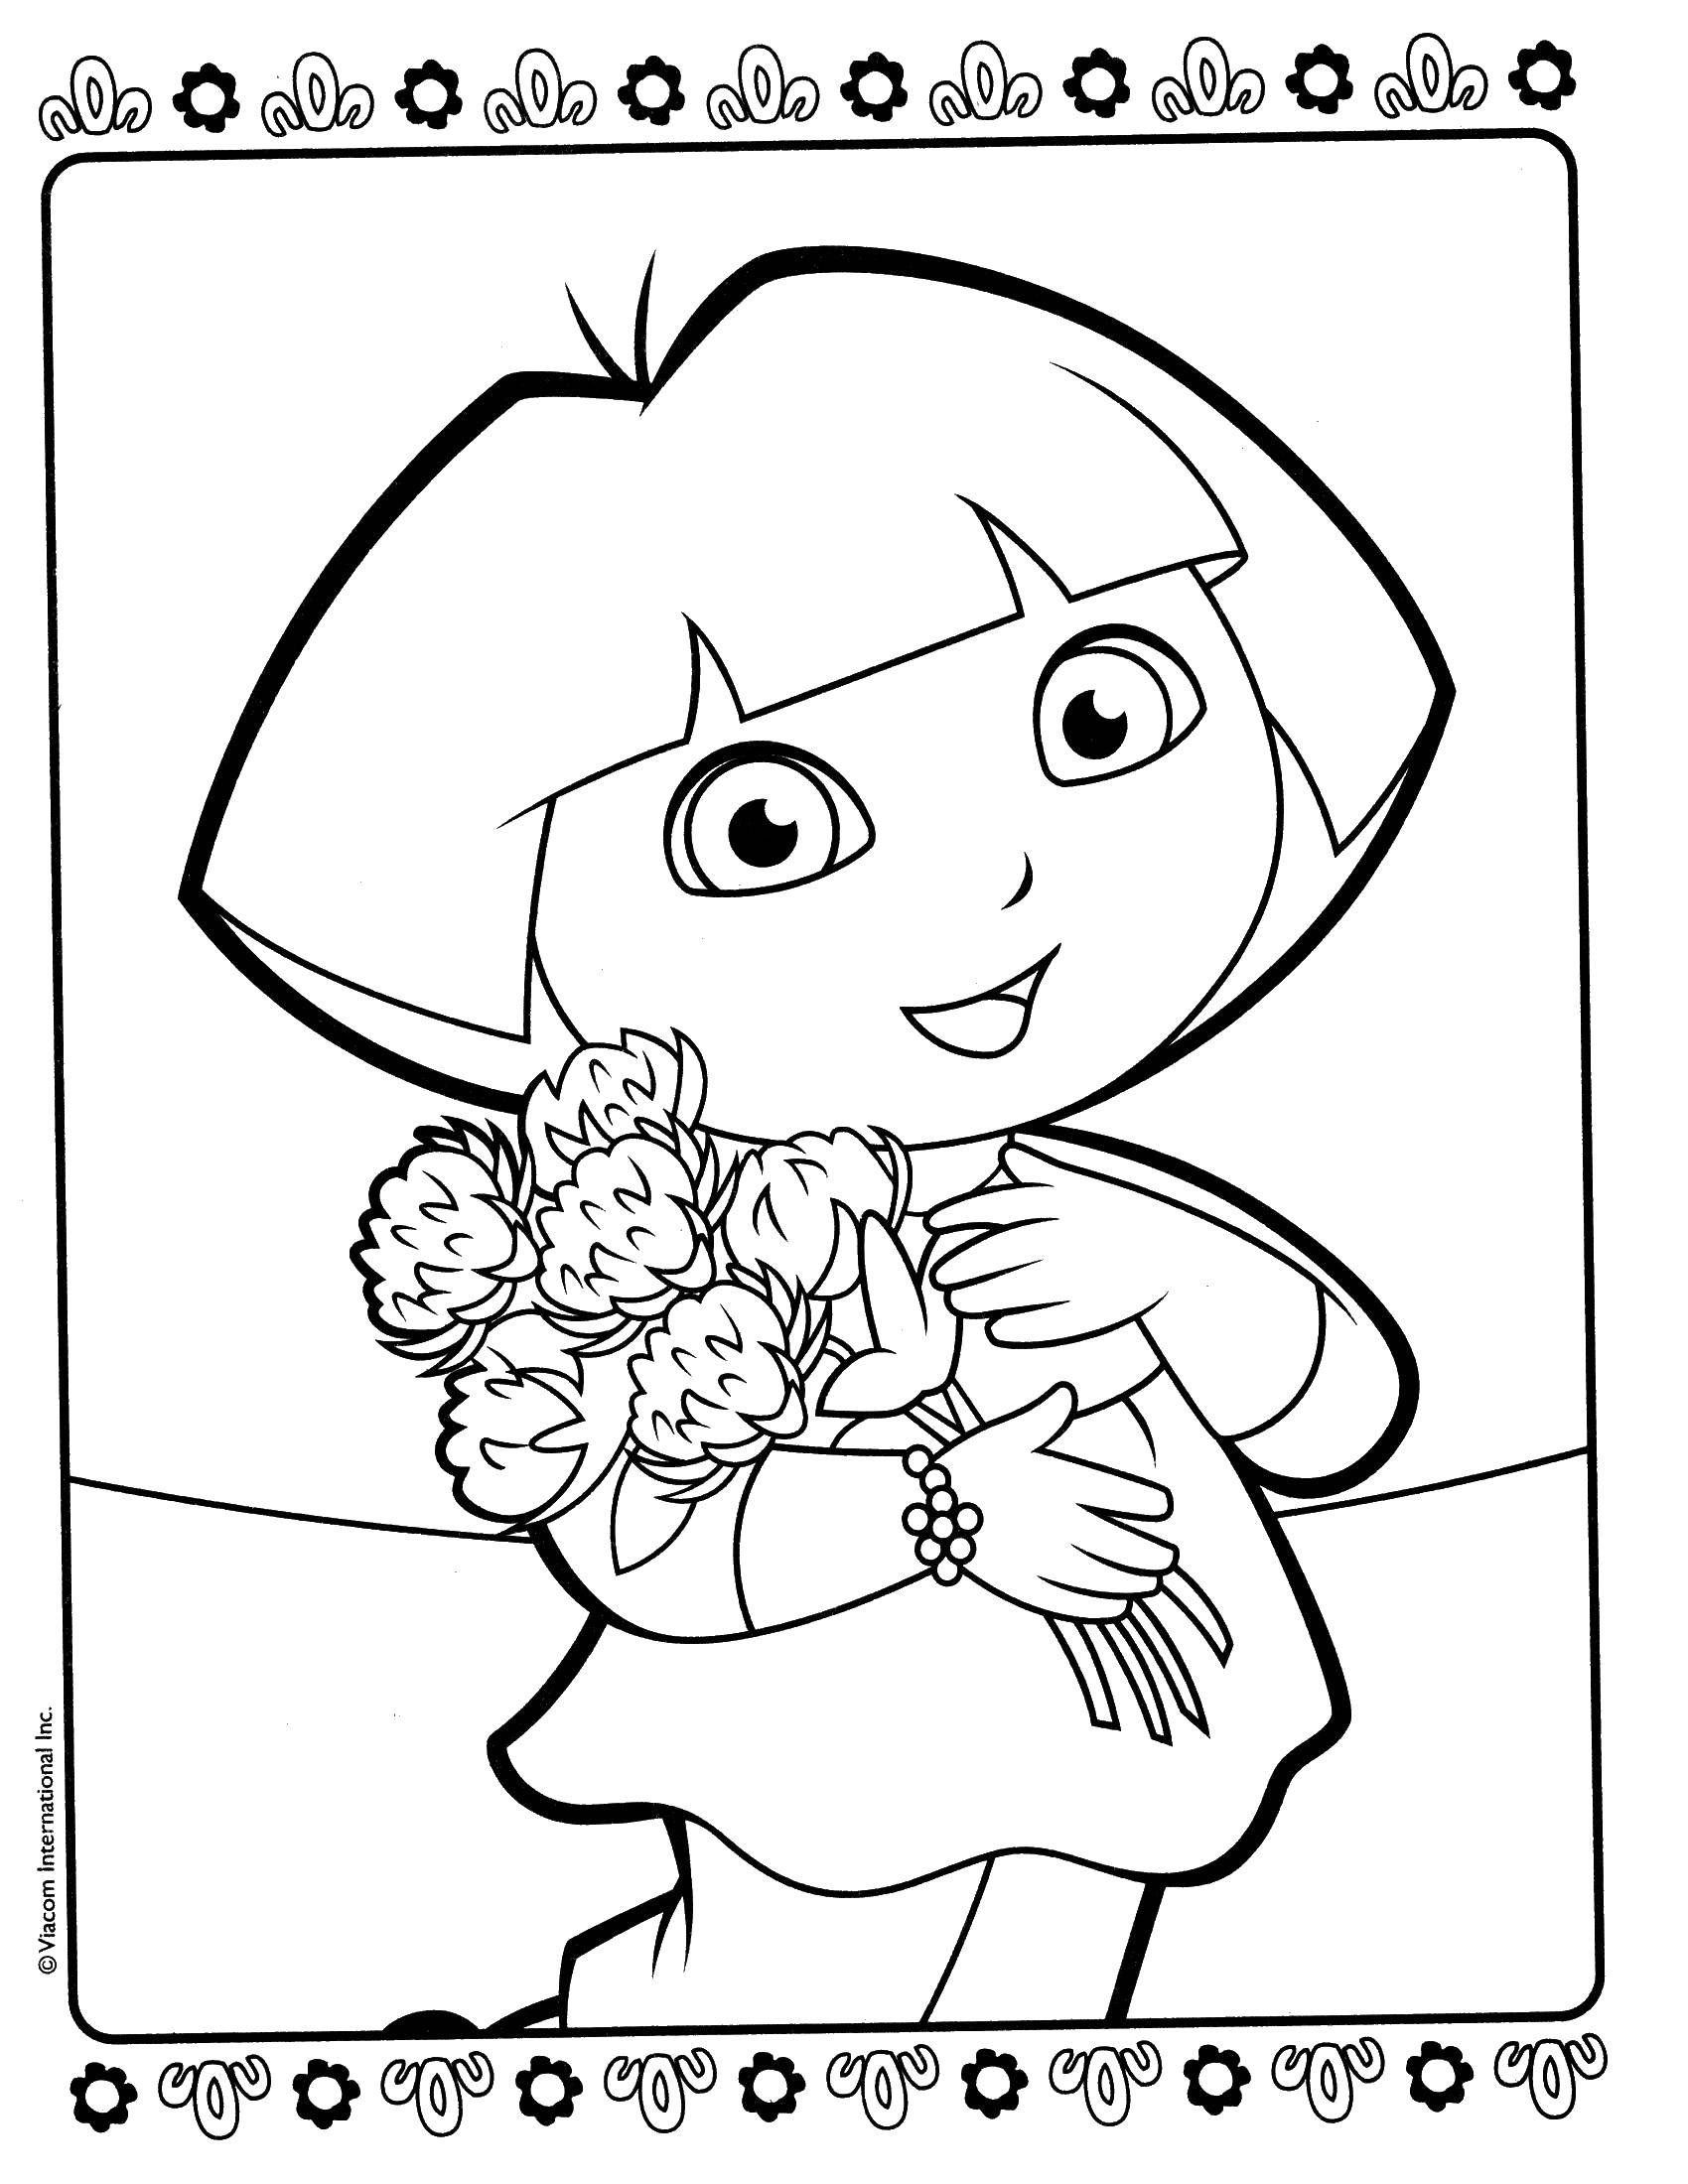 Coloring Dasha with flowers. Category Dora. Tags:  Dora, flowers.